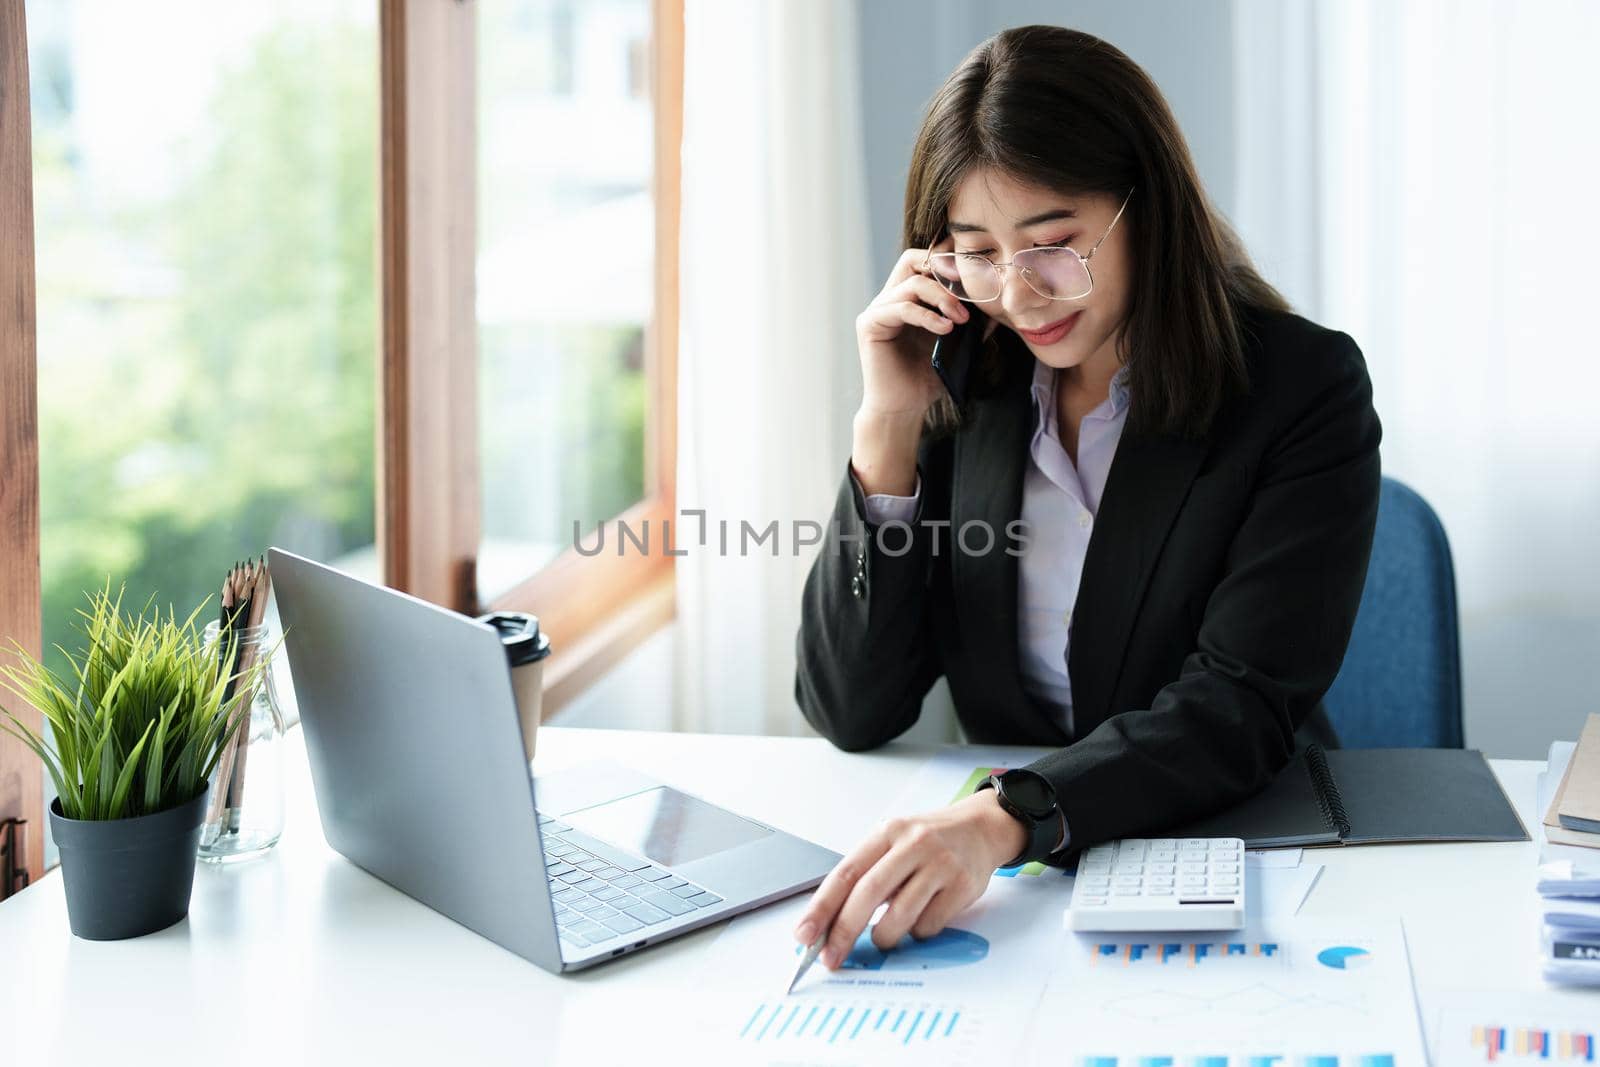 Business correspondence, consultation, portrait of an Asian woman on the phone talking and planning financial statements and investments and using computers and documents to analyze financial systems. by Manastrong